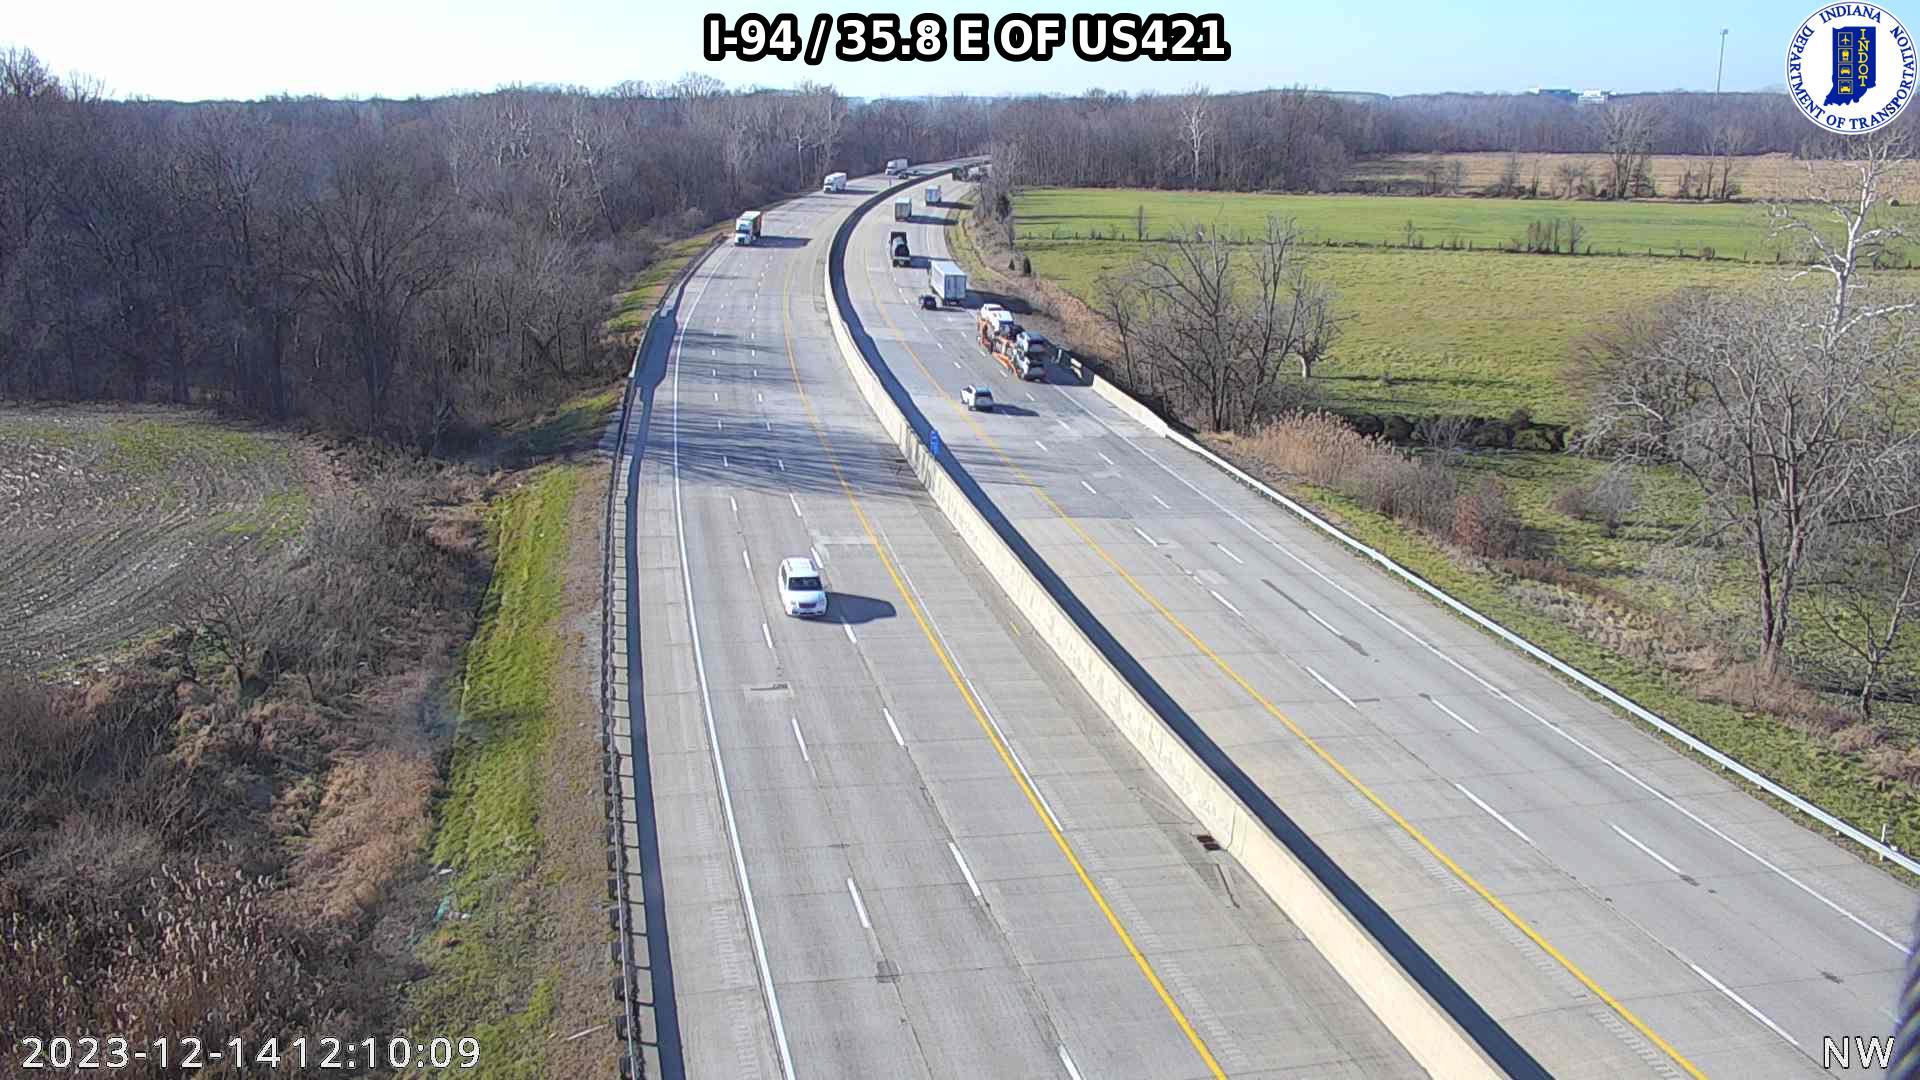 Traffic Cam Waterford: I-94: I-94 - 35.8 E OF US421: I-94 - 35.8 E OF US421 Player